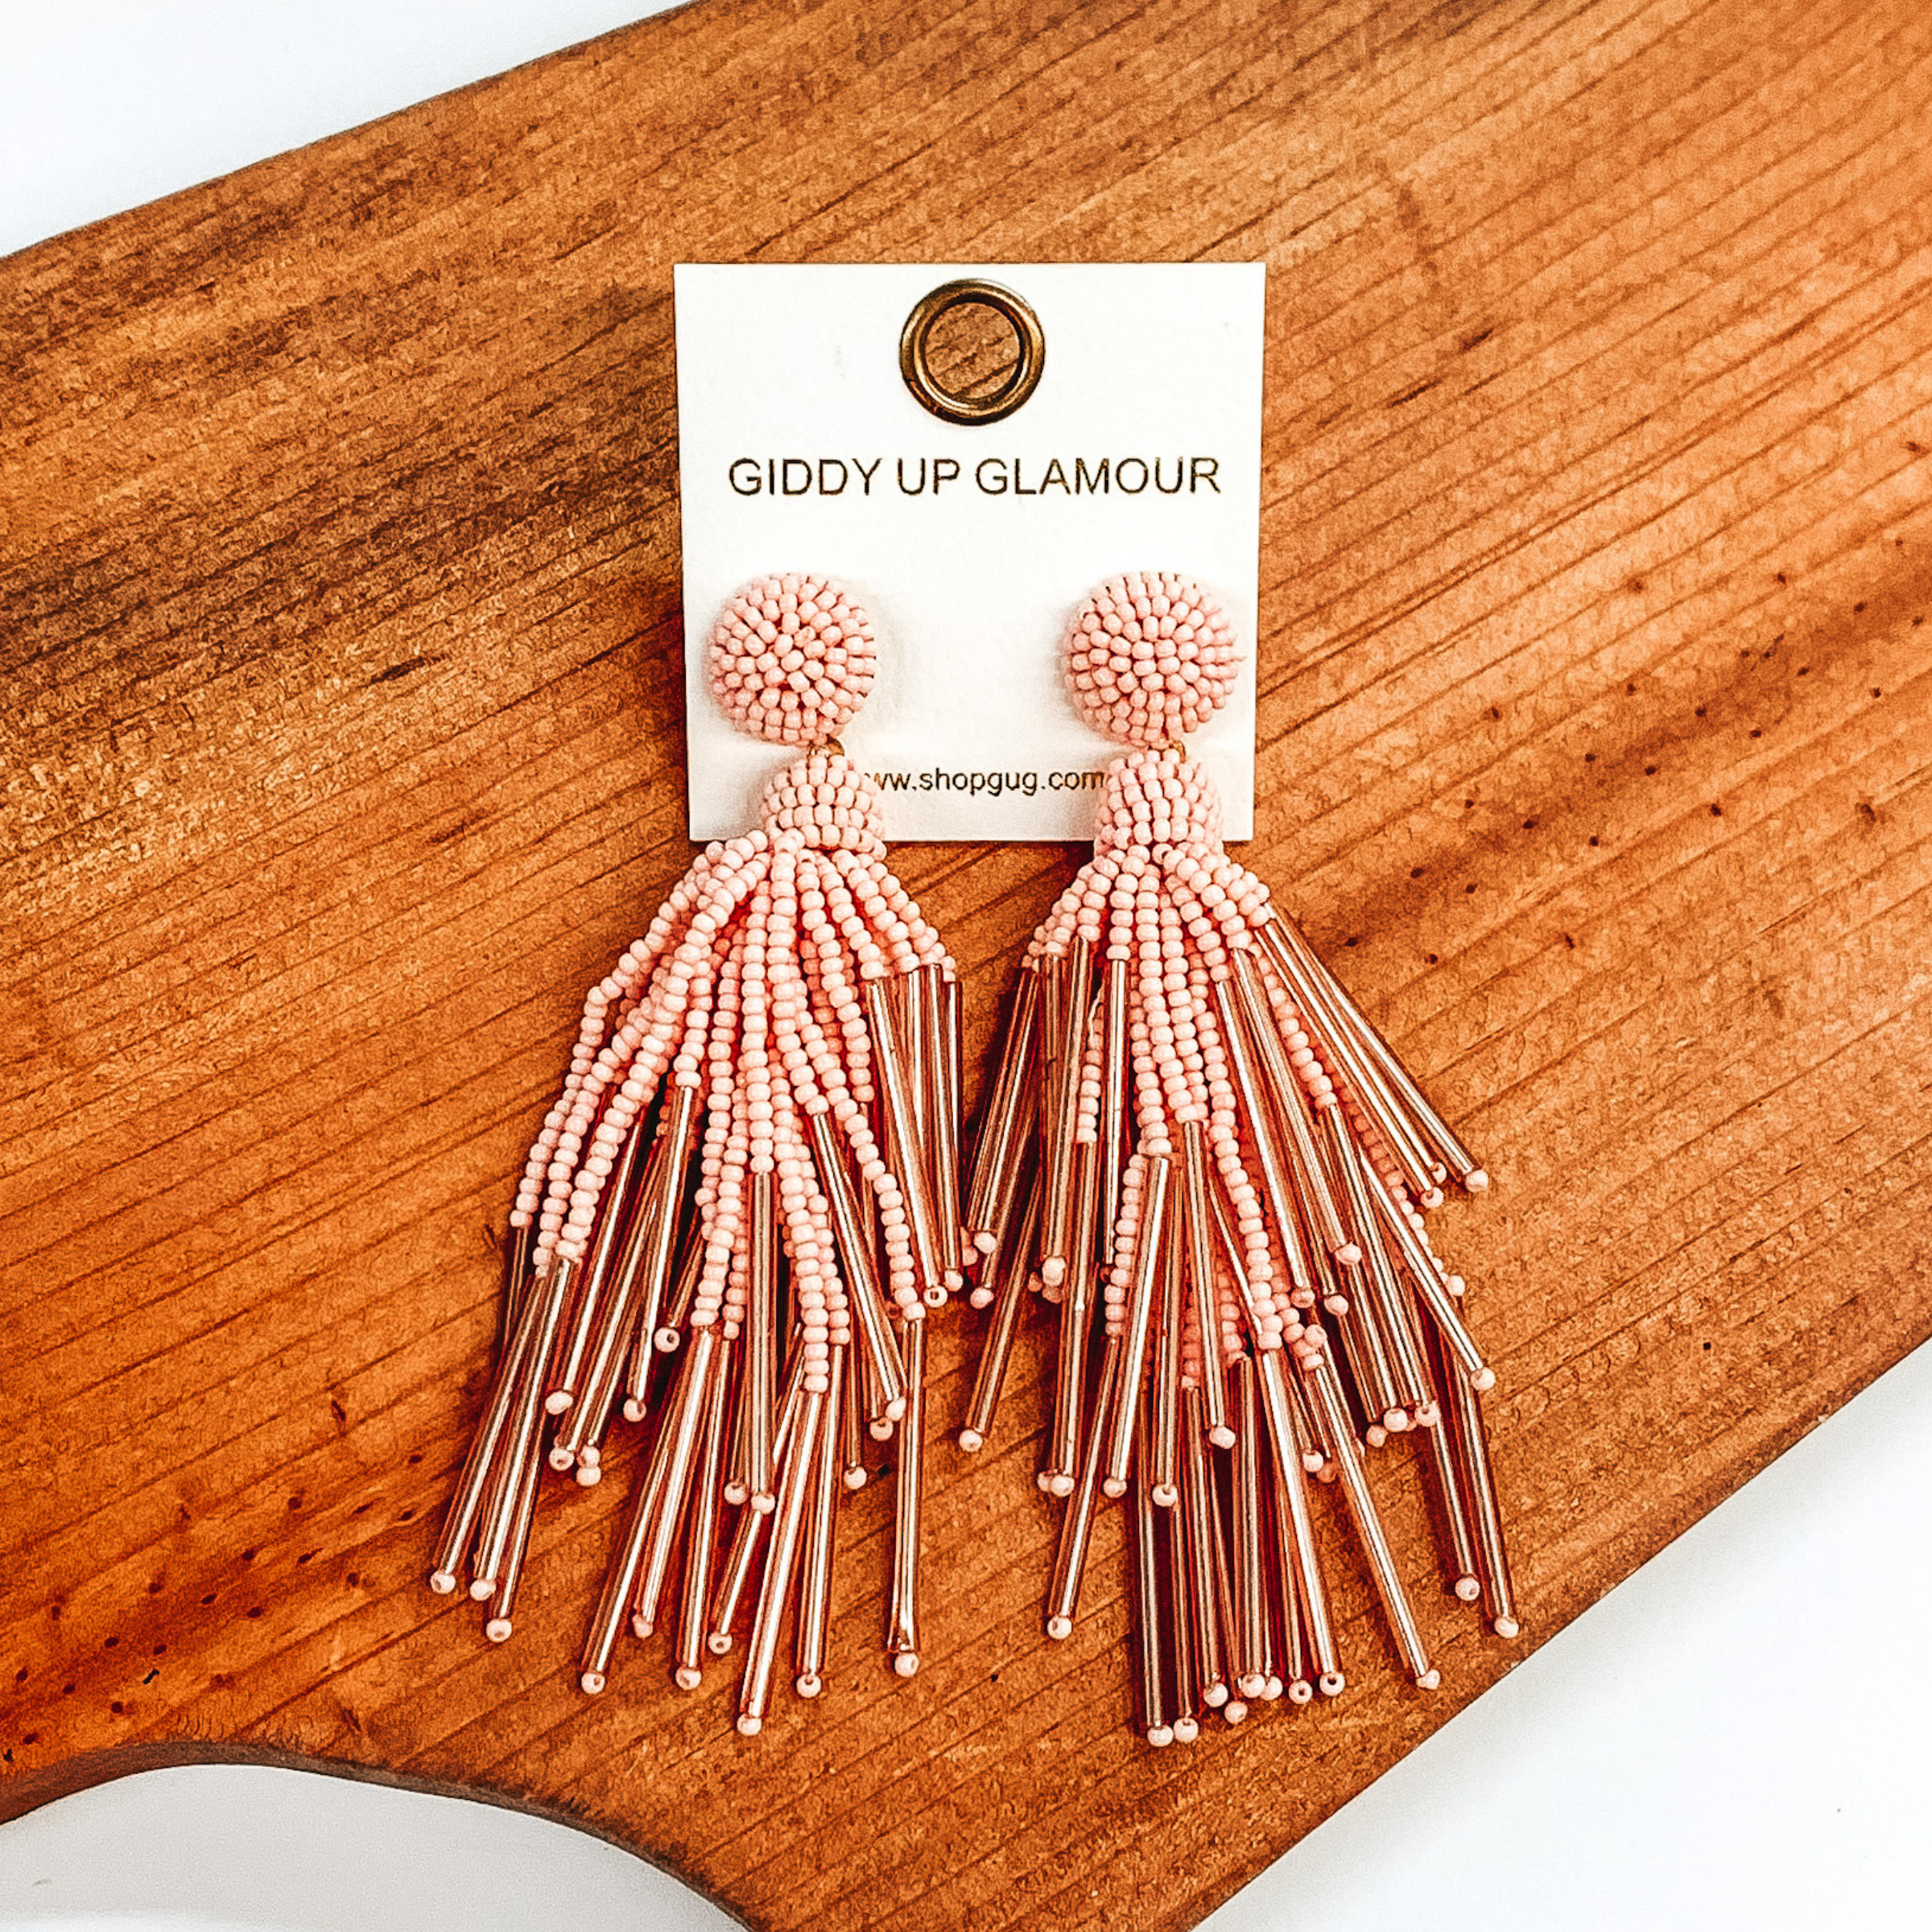 Circle beaded stud earrings with a beaded tassel in baby pink. These earrings are pictured laying on a brown piece of wood on a white background.